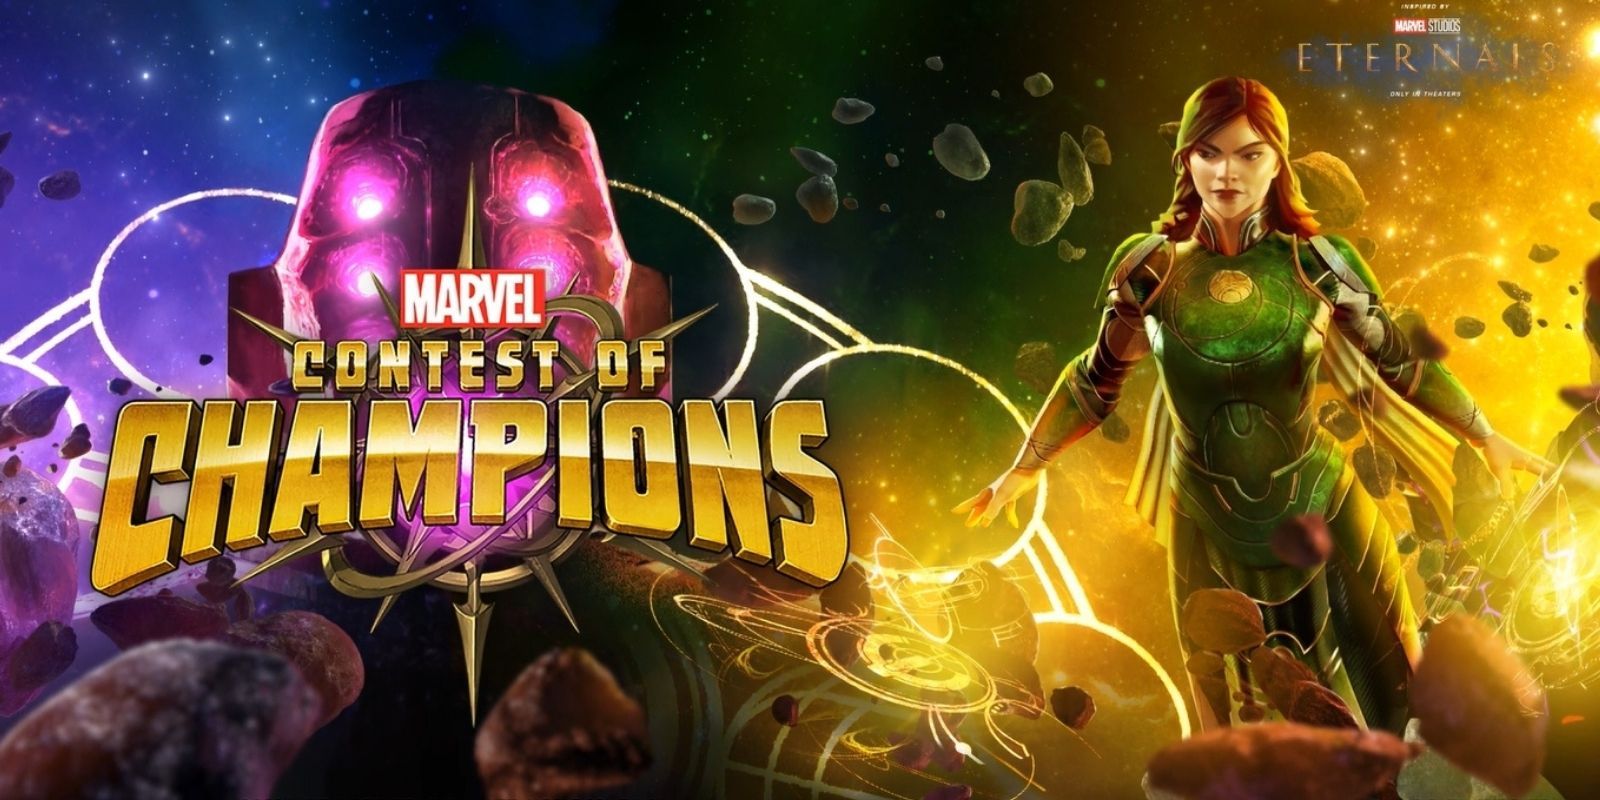 Marvel Contest of Champions key art featuring Sersei from Eternals